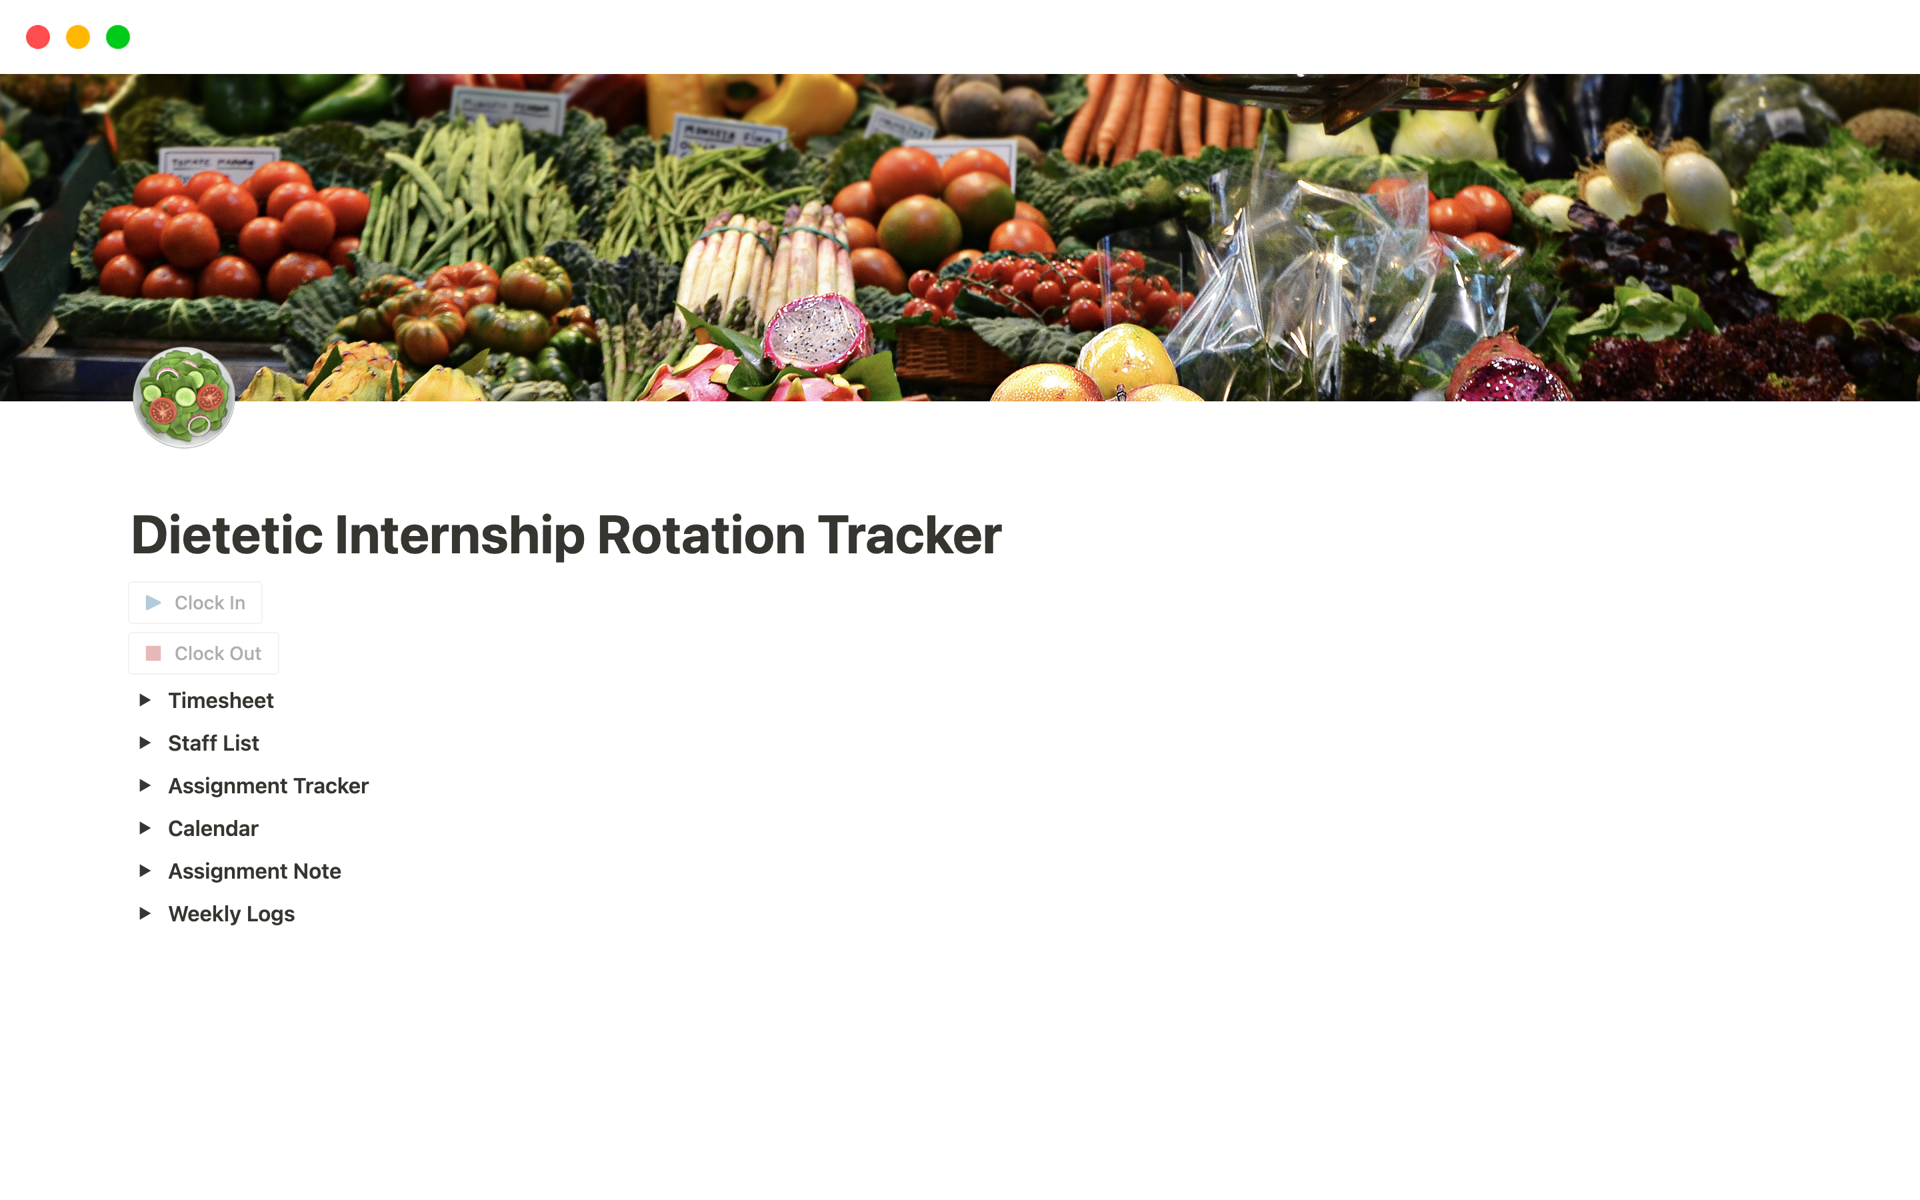 Mainly for Dietetic Internship Tracking.